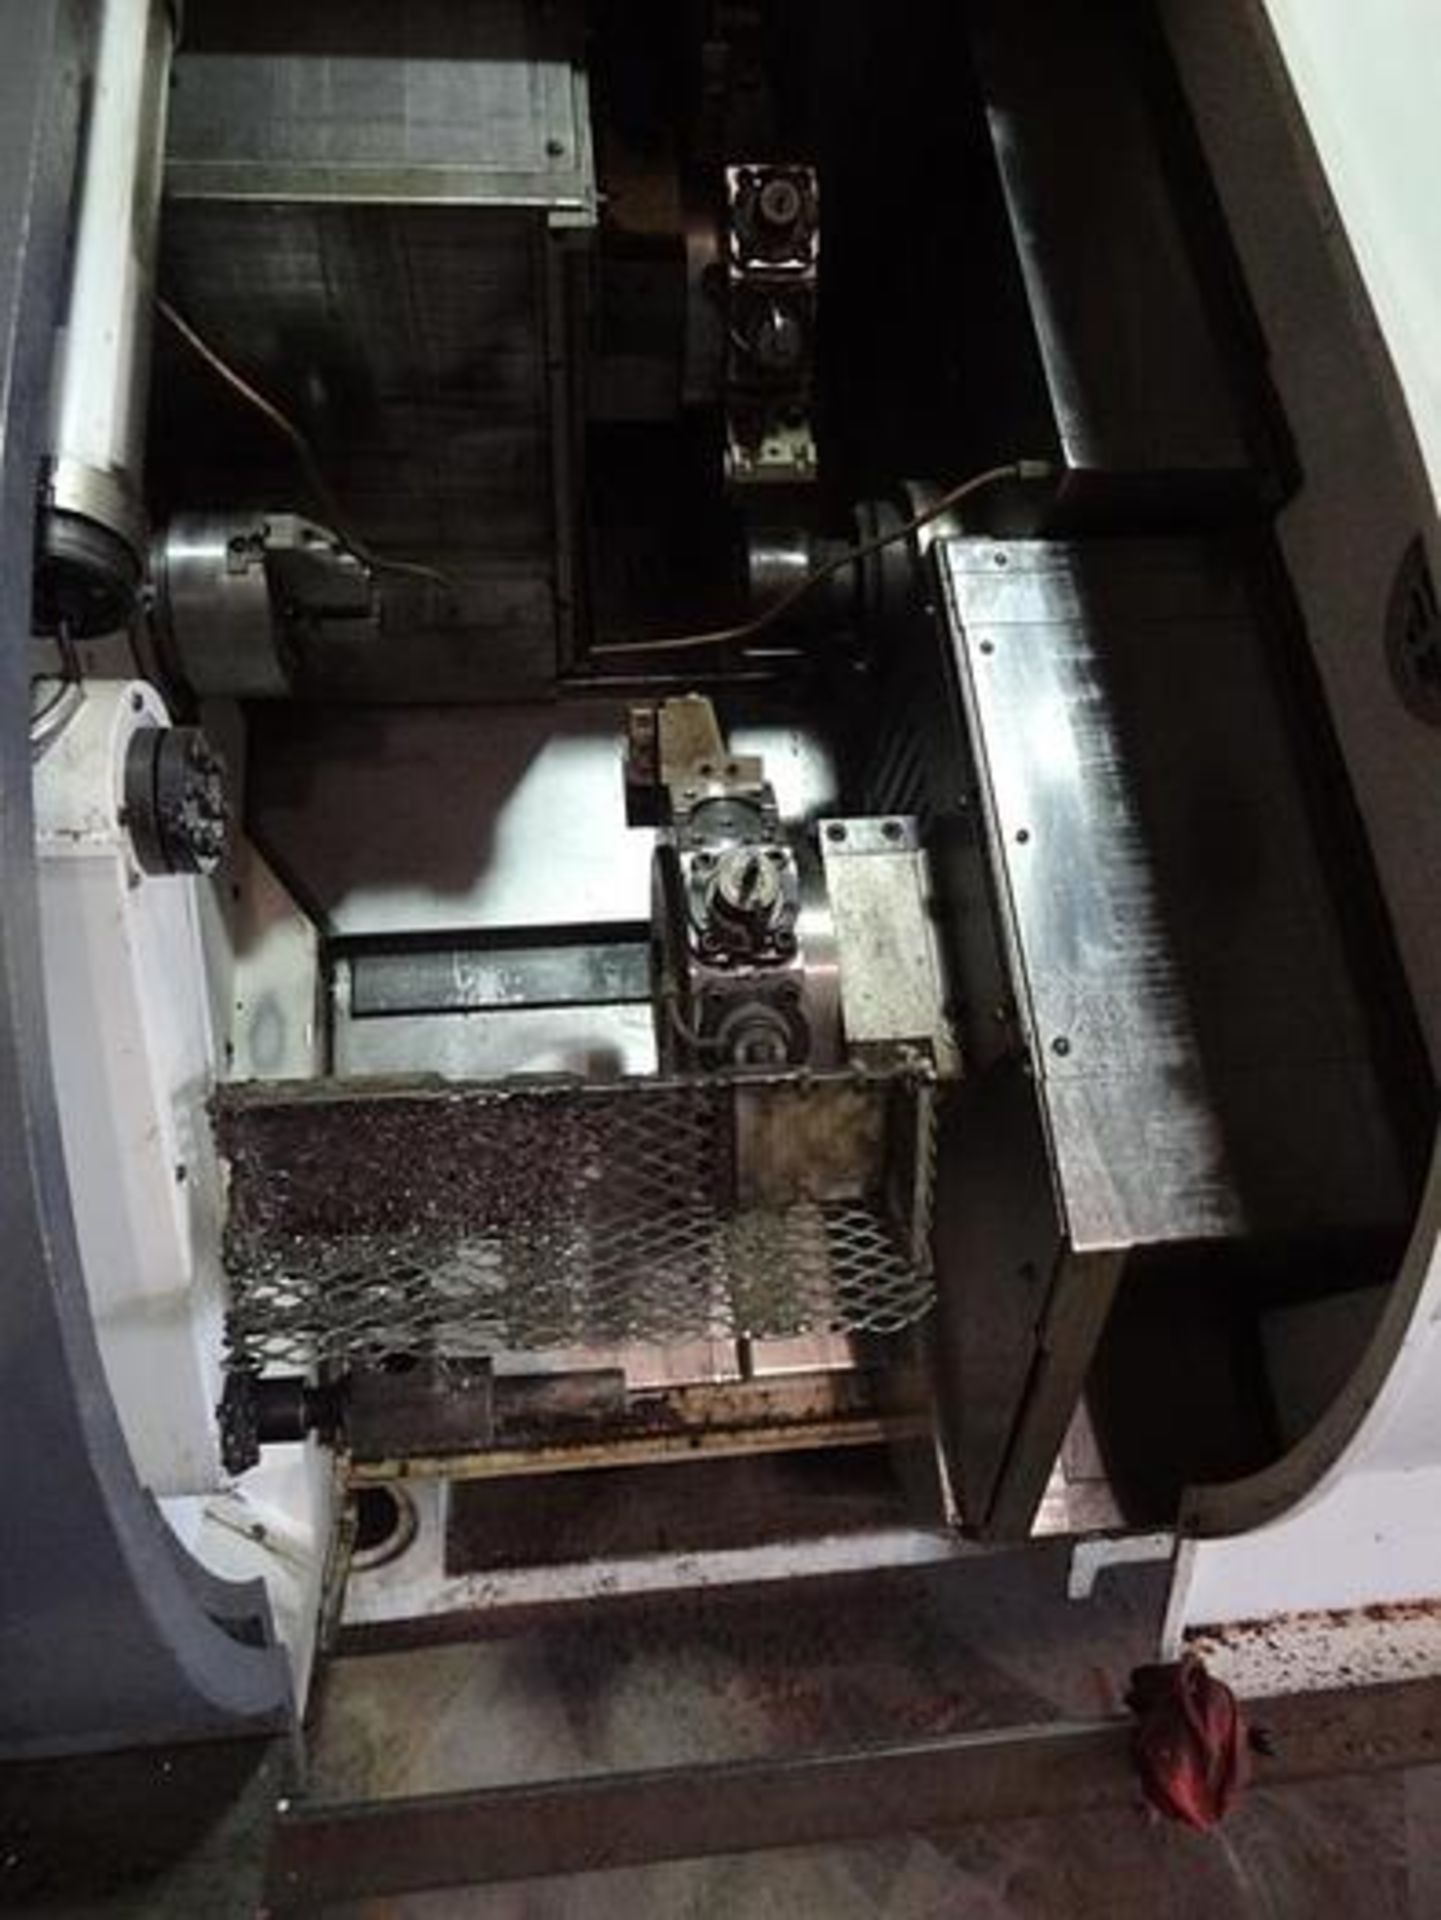 NAKAMURA TOME WT150MMY CNC 8 AXIS LATHE, YEAR 2005, SN M152808, LOCATION MI - Image 7 of 11